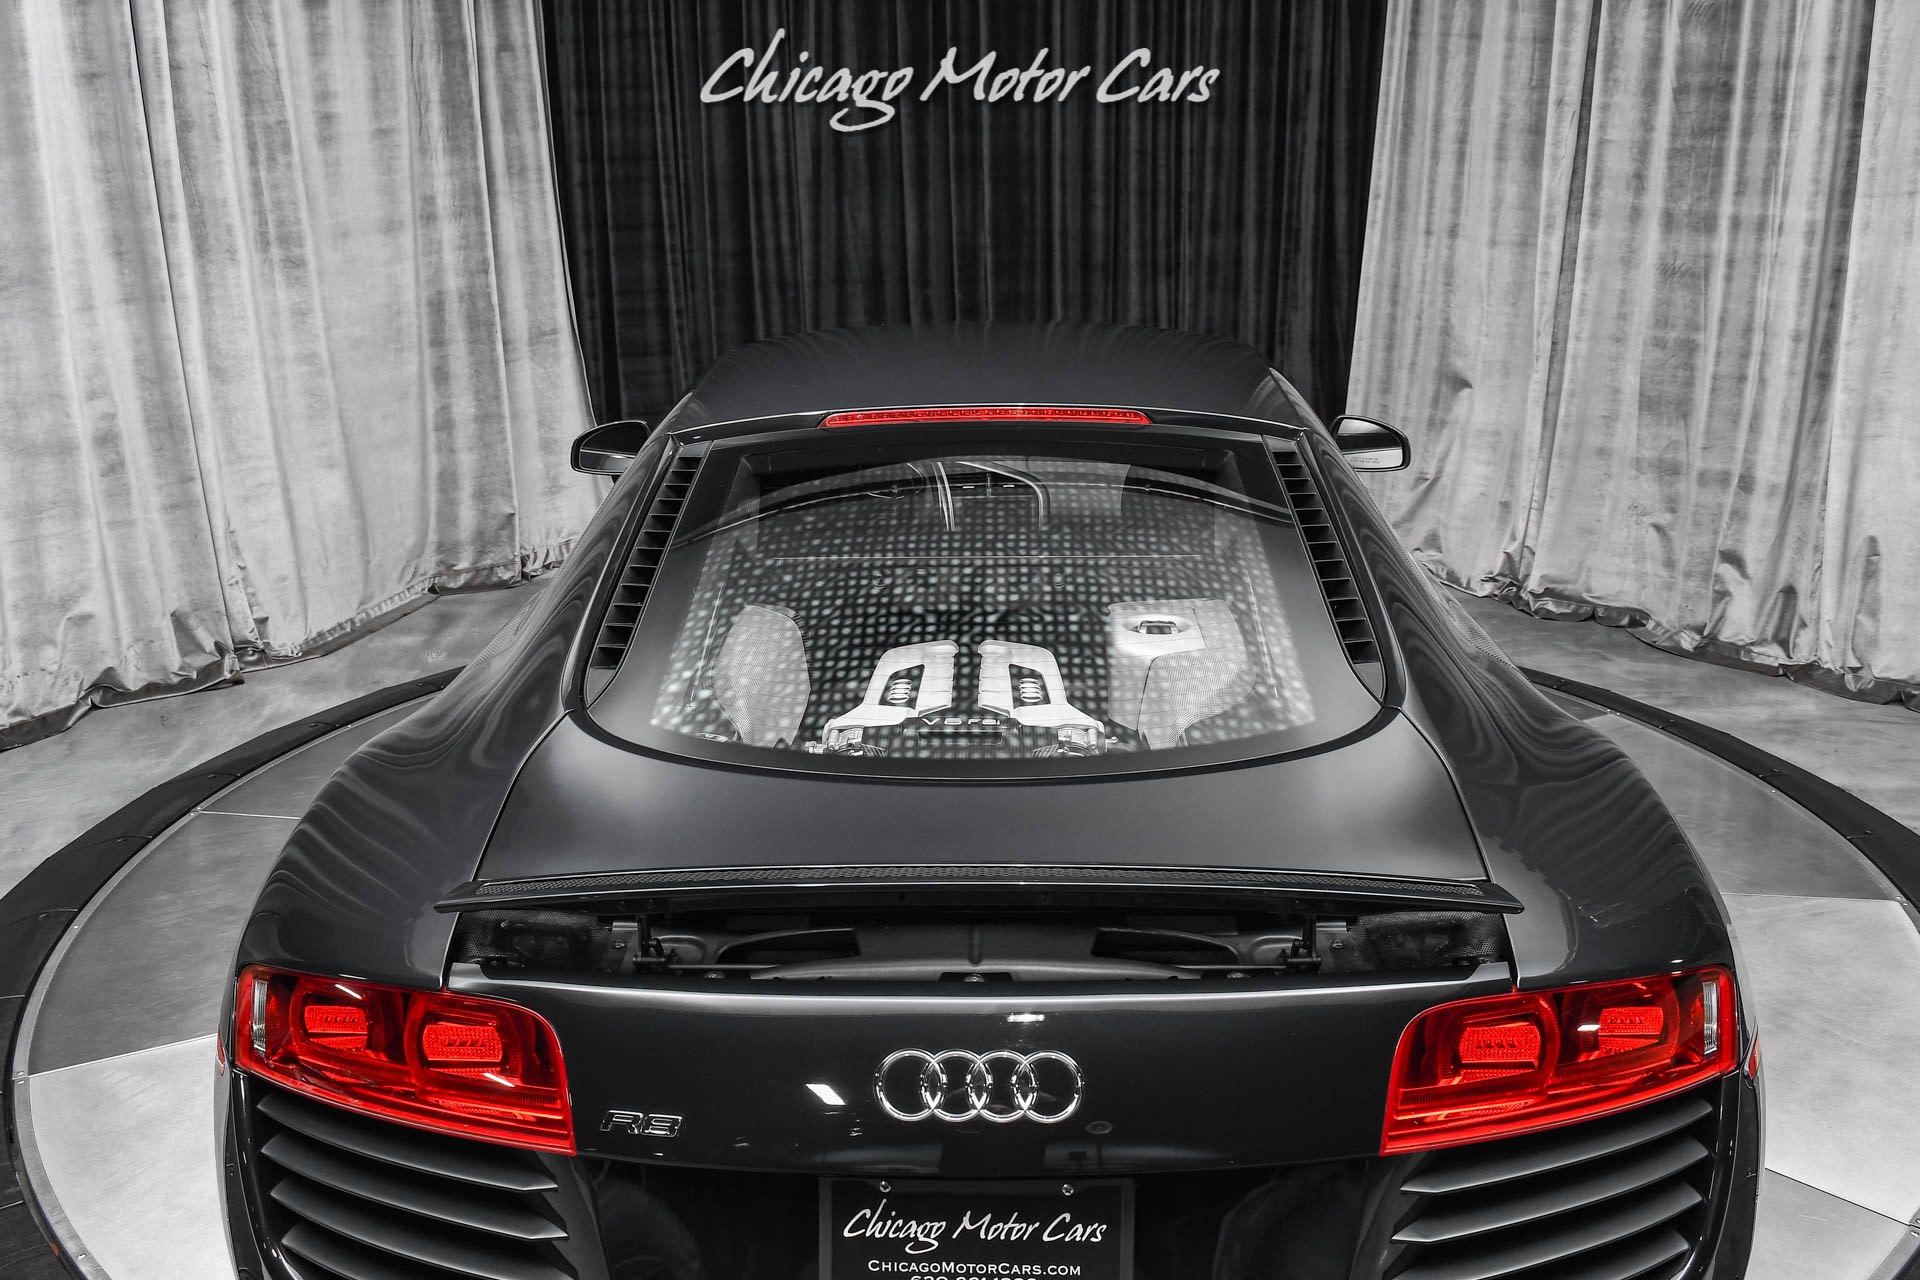 Used-2008-Audi-R8-quattro-Coupe-RARE-6-Speed-Gated-Manual-Carbon-Fiber-LOW-mIles-LOADED